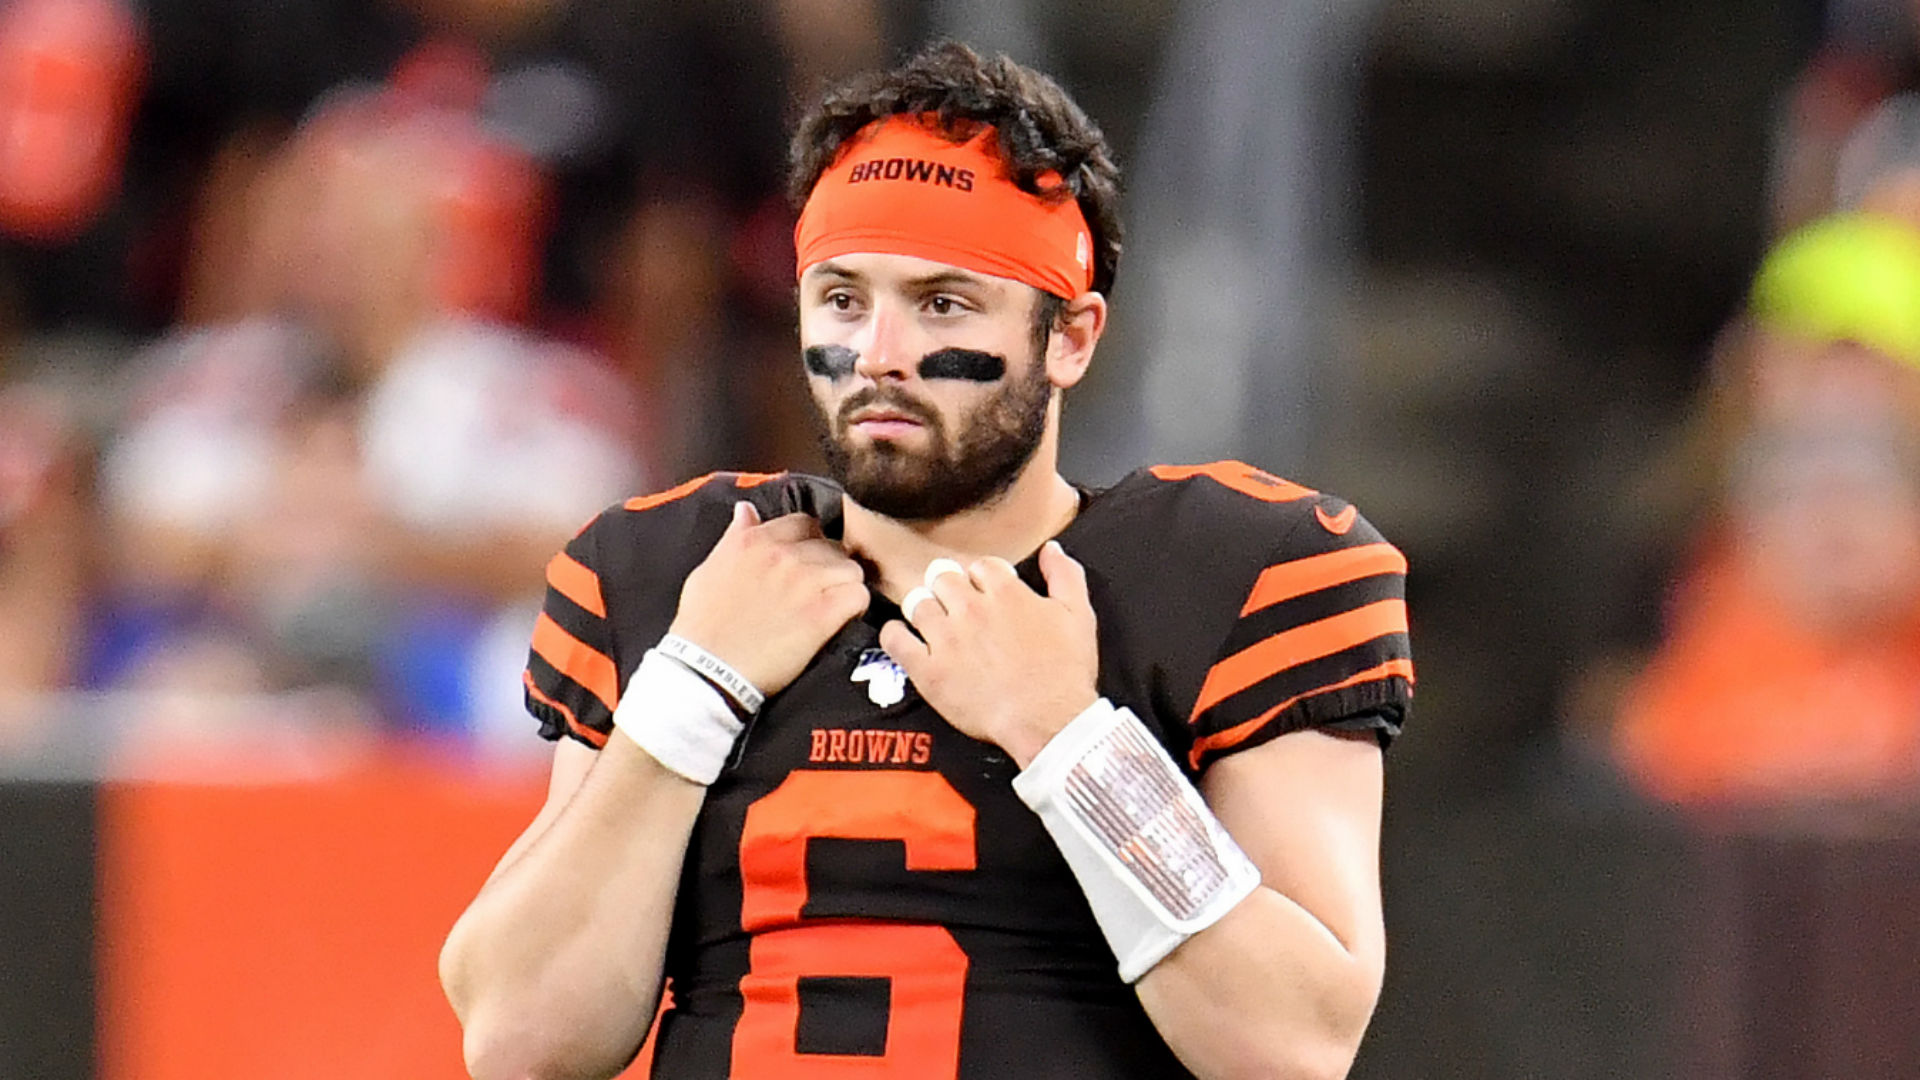 Why Baker Mayfield Only Gets 1 More Year to Prove Himself